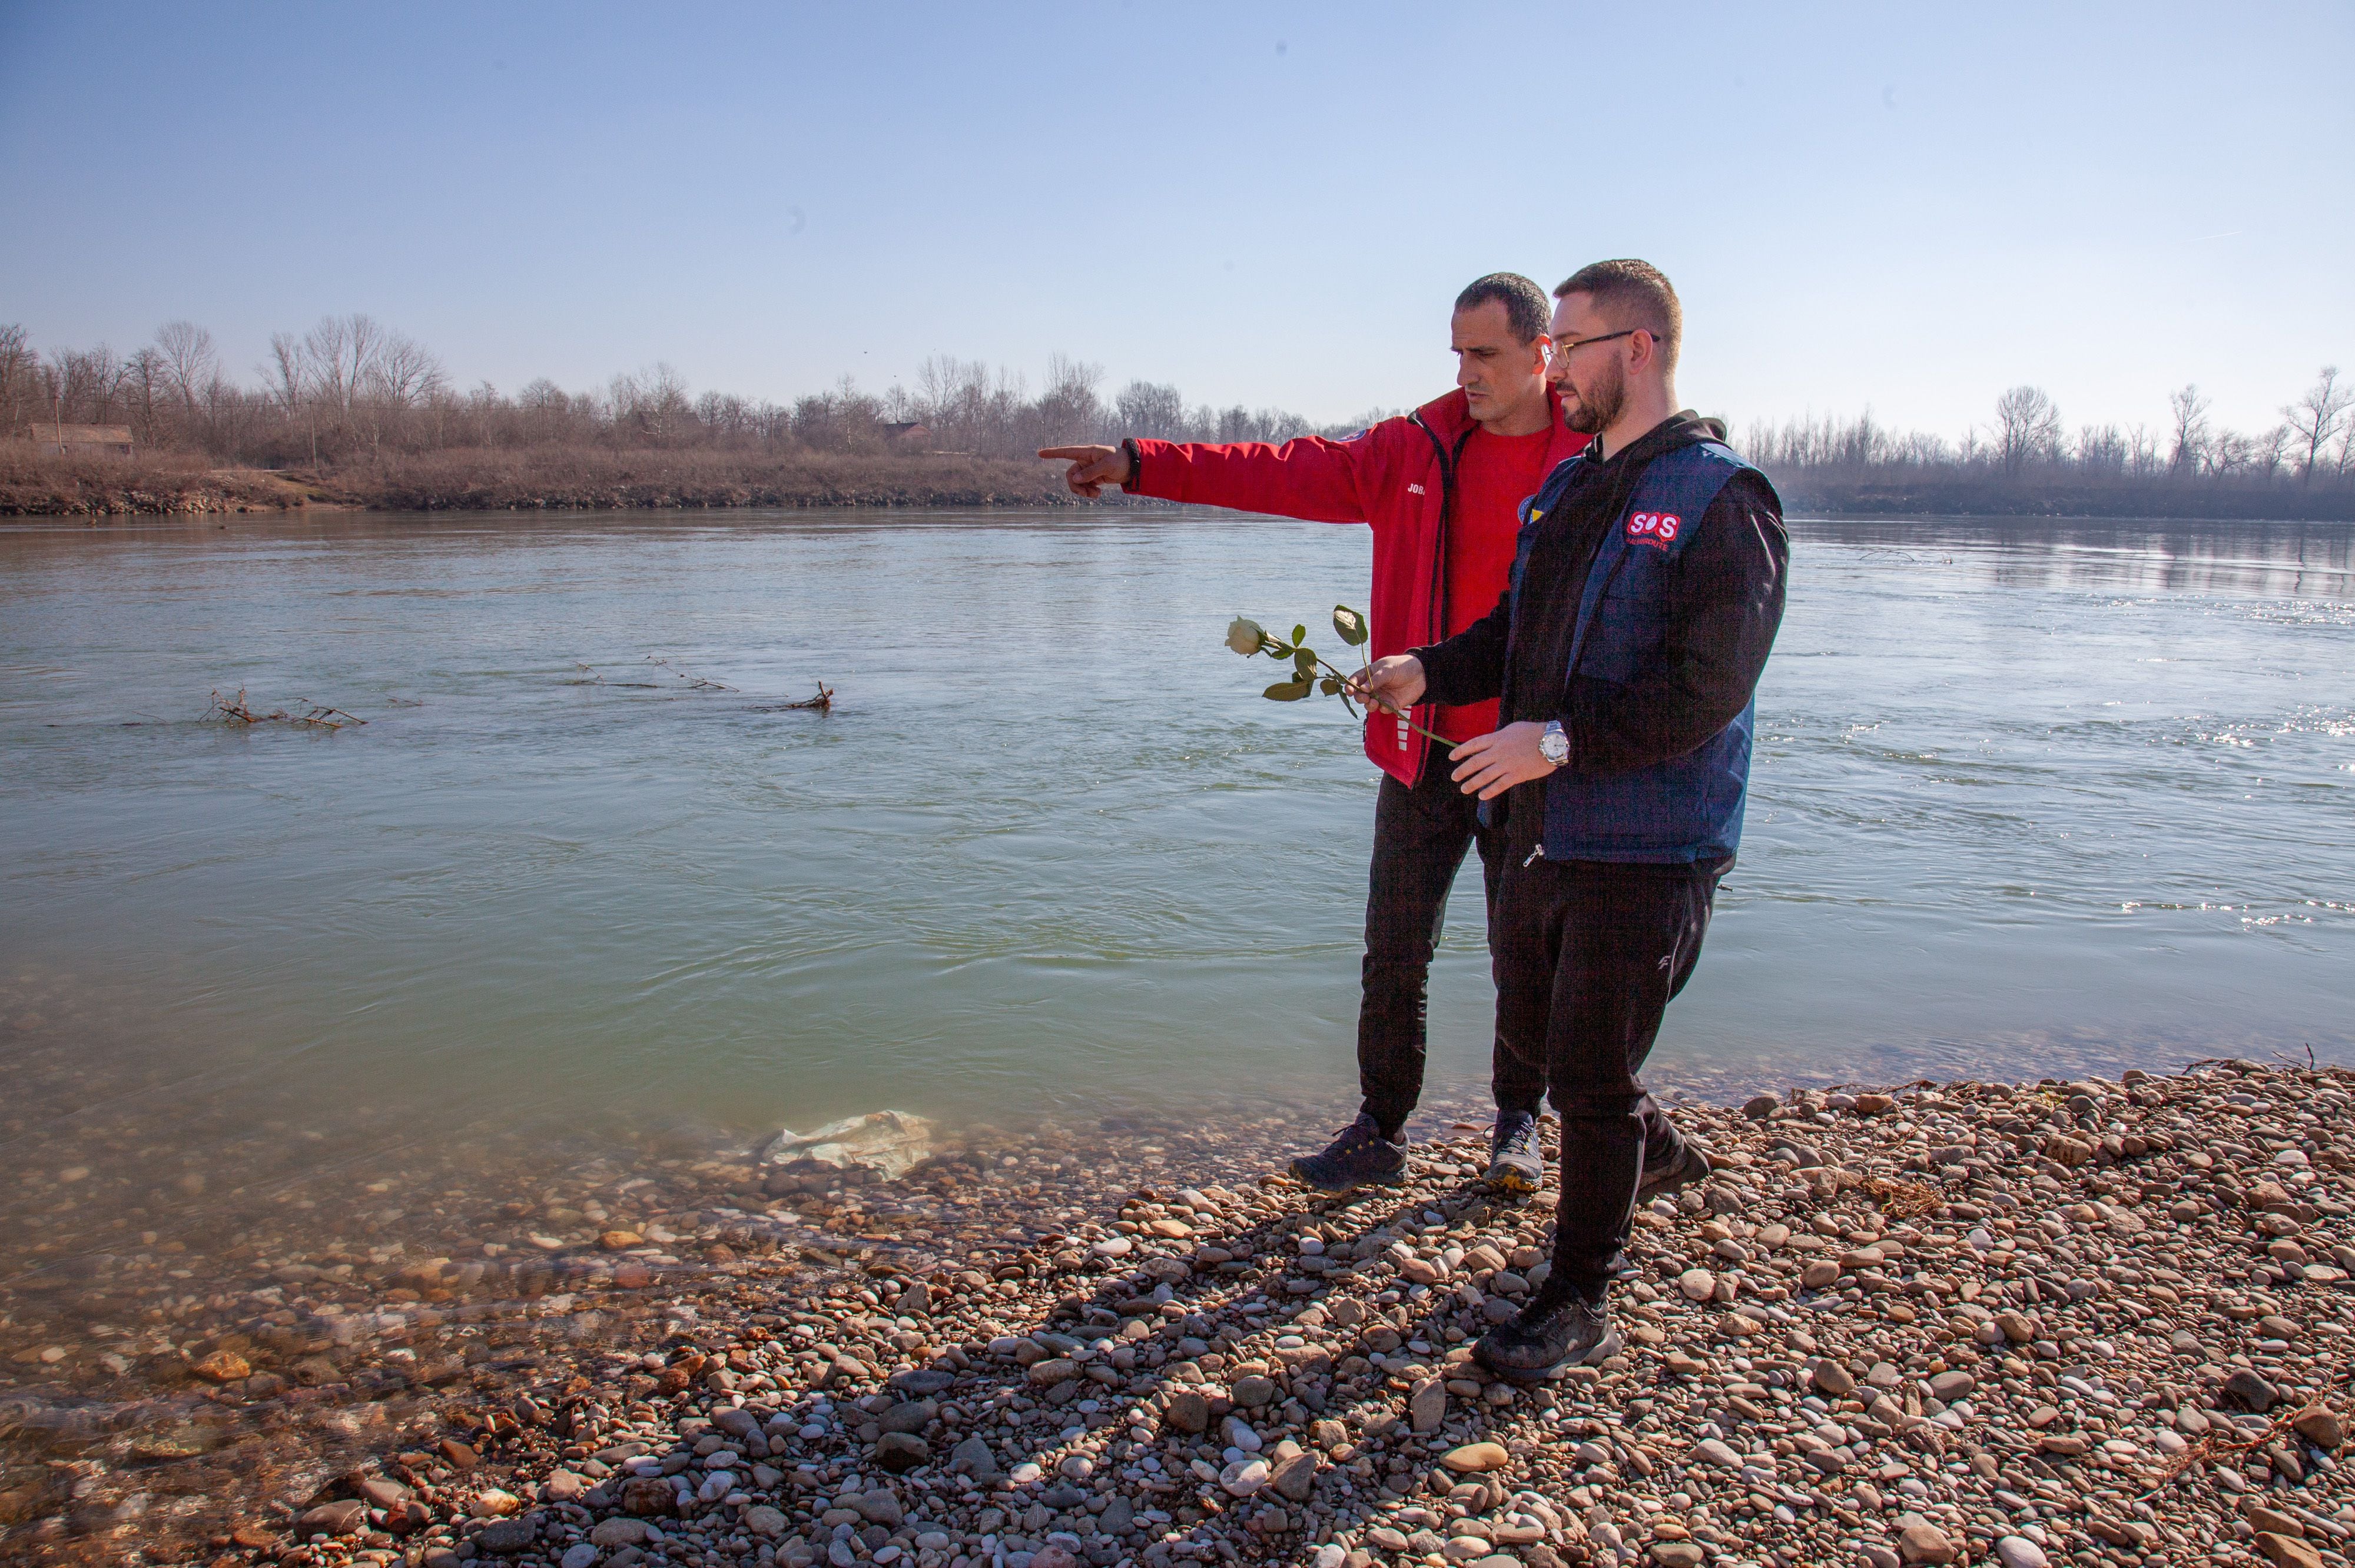 Nihad Suljić of Tuzla helps families of lost migrants; Nenad Jovanović is part of the Bosnian Mountain Search and Rescue operations, which recovers the bodies of those who drown in the Drina River. They're dropping four white roses in memory of those who perished. 